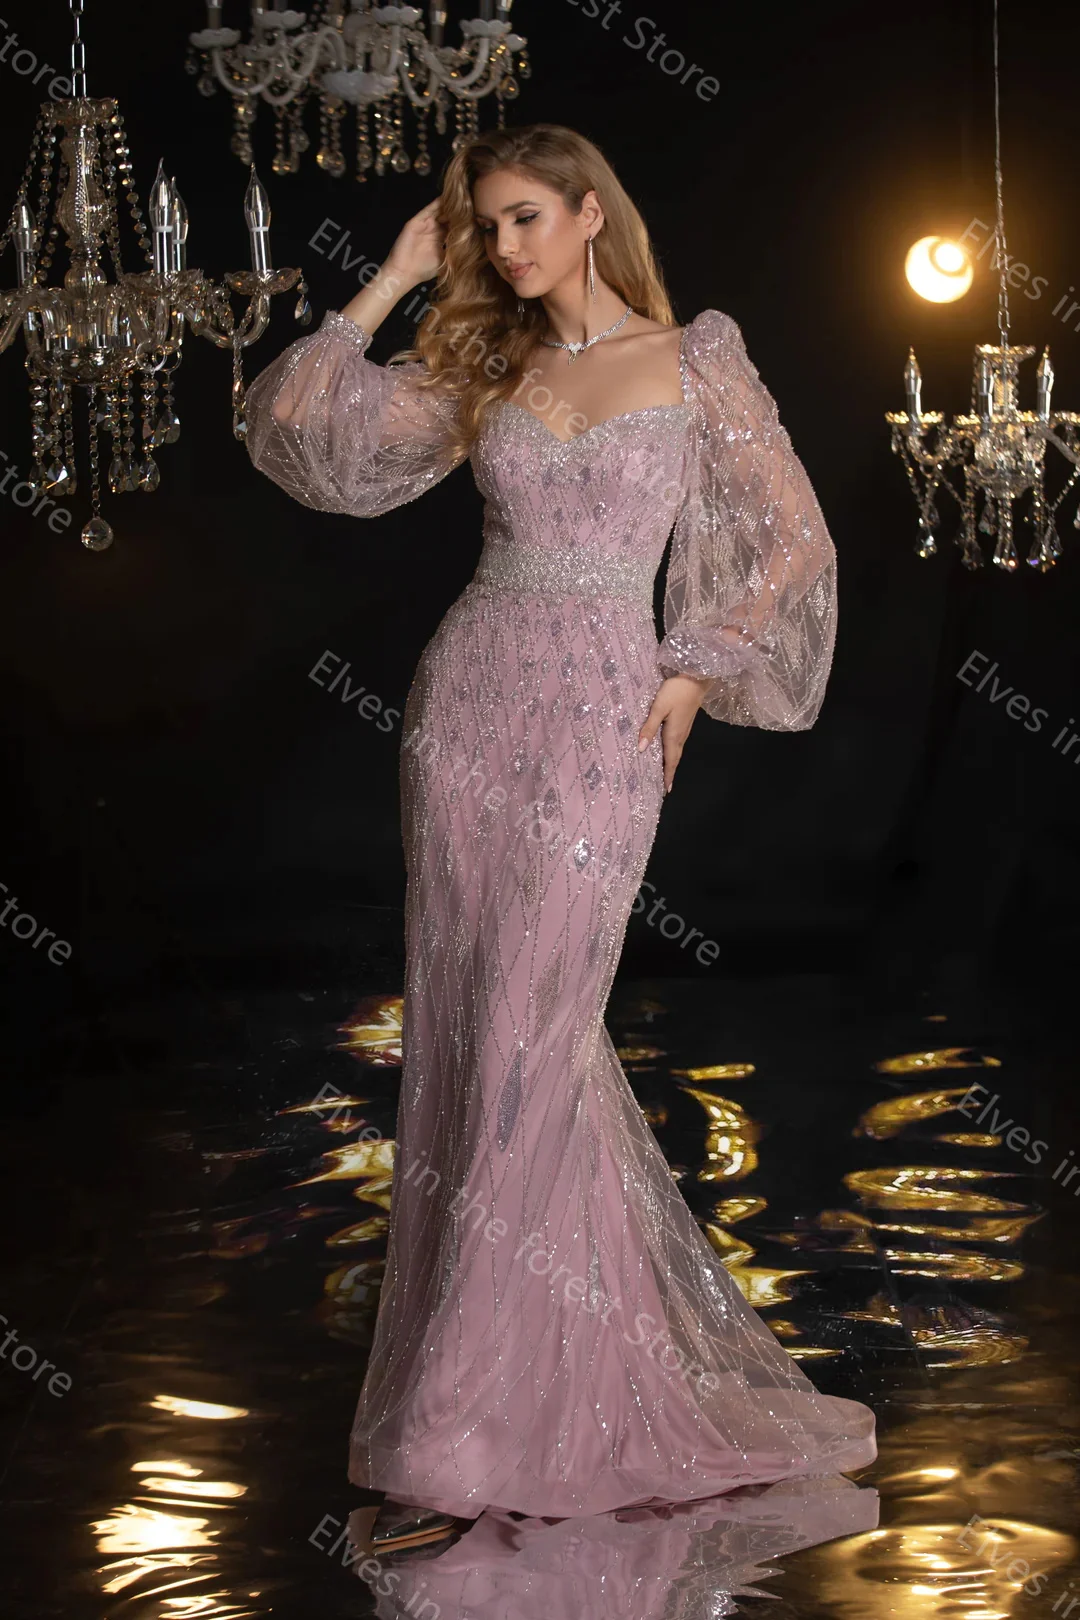 Glitter Pink Mermaid Evening Dresses Sequins Long Sleeves Prom Gowns Luxury Floor Length Celebrity Homecoming Party Dresses